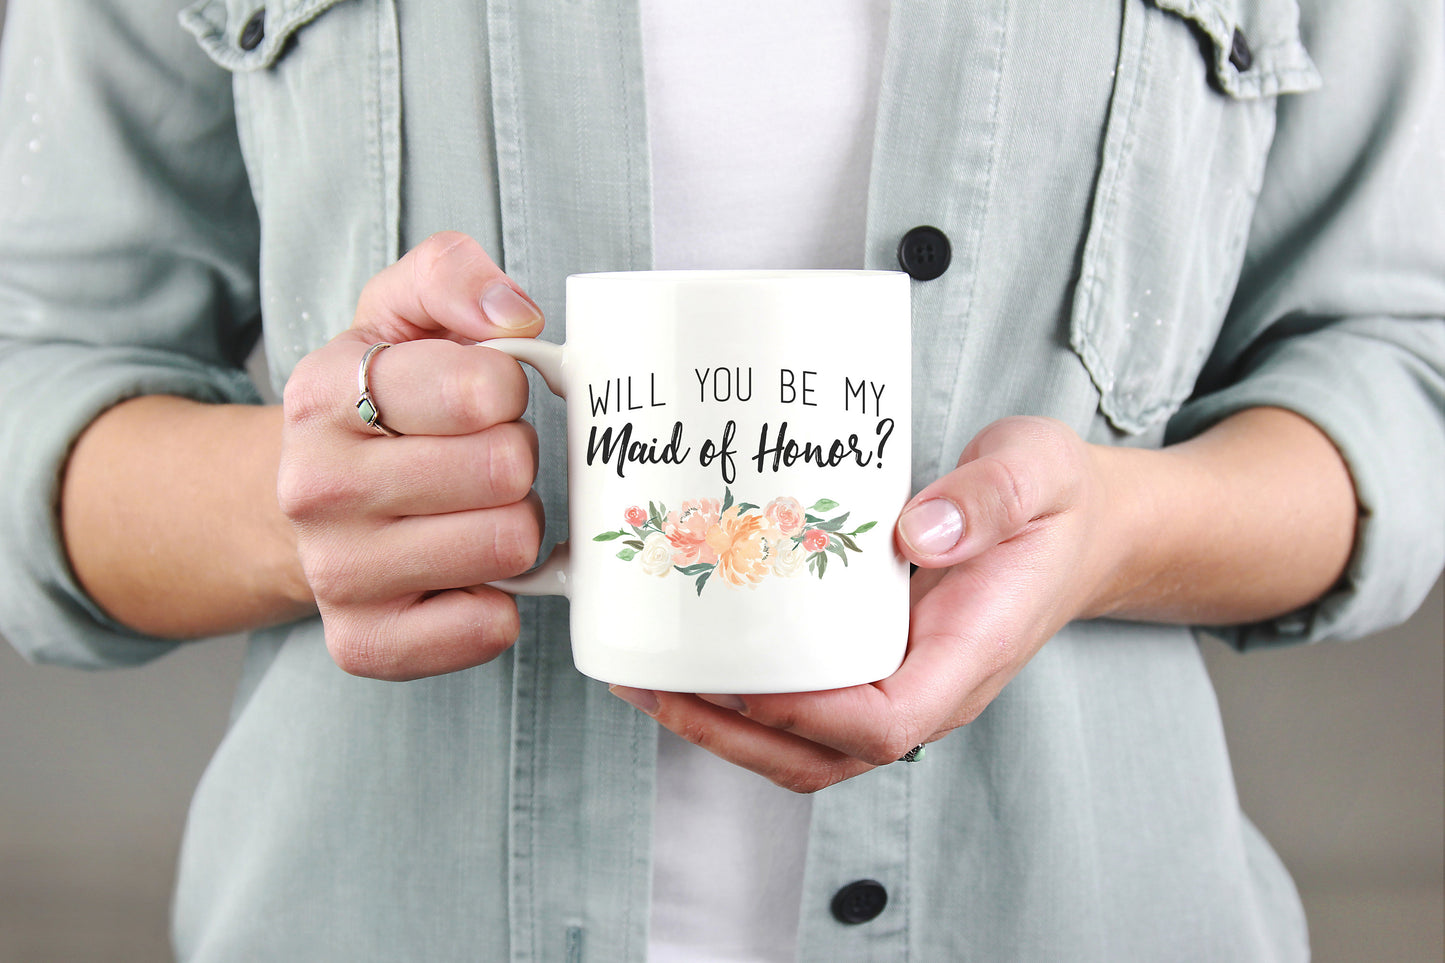 Will You Be My Maid Of Honor? Mug - Maid of Honor Gifts, Maid Of Honor Mug, Bridal Party Gift, Bridal Party Box, Wedding Announcement